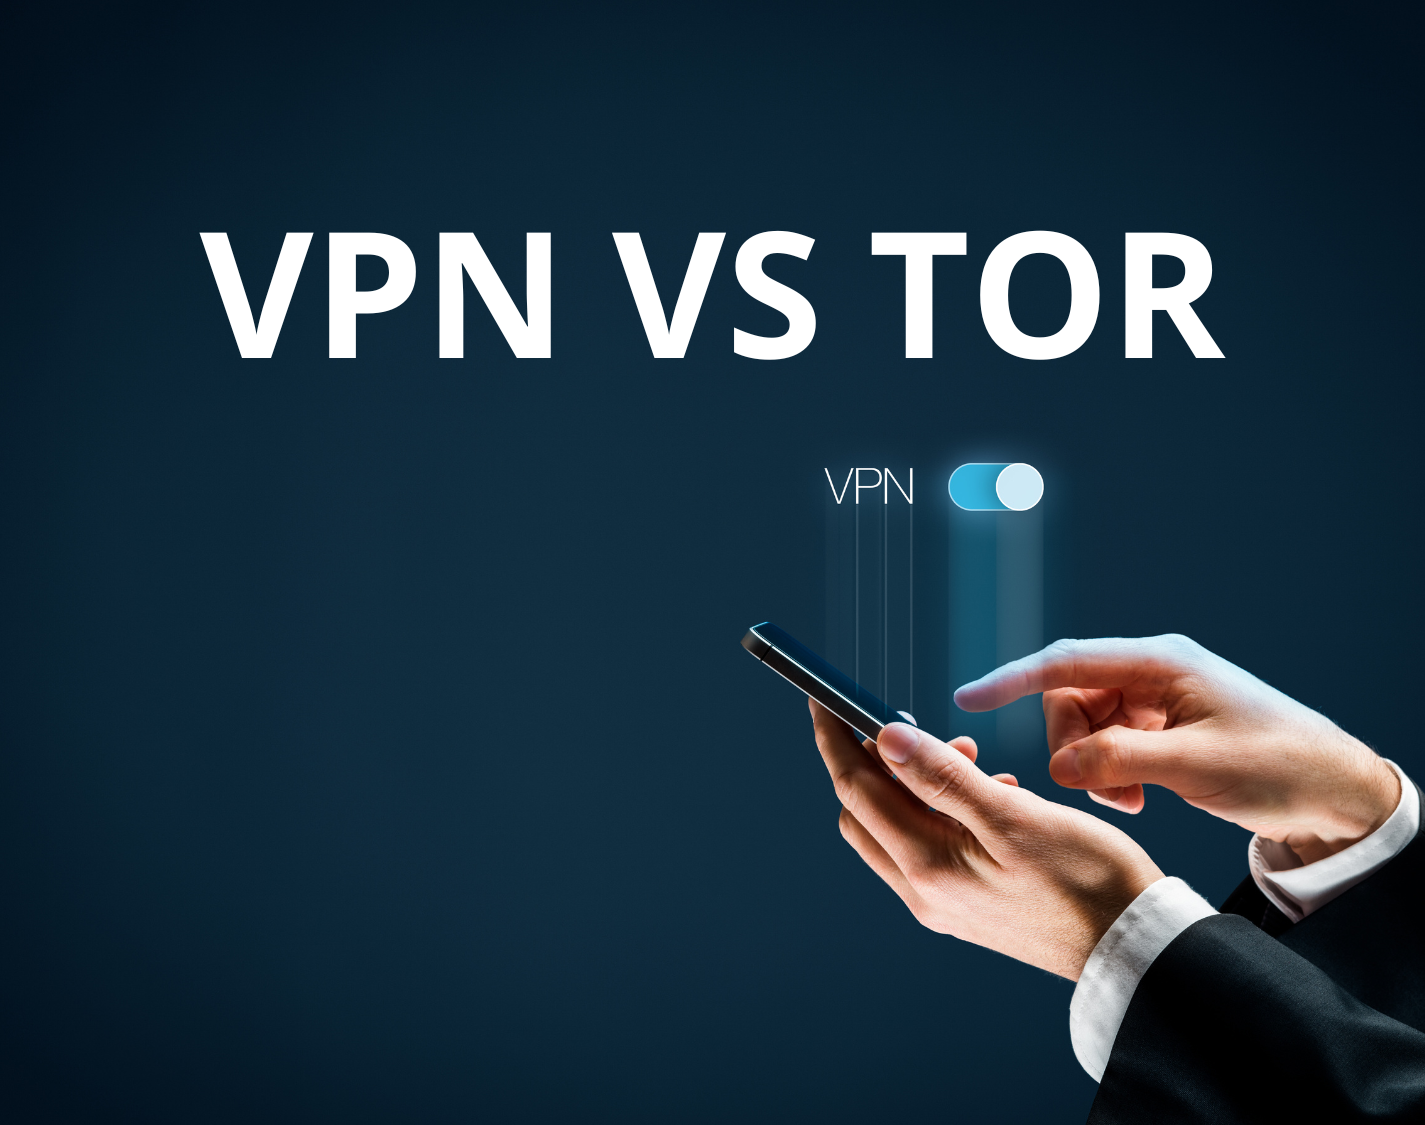 What's the difference between VPN and TOR